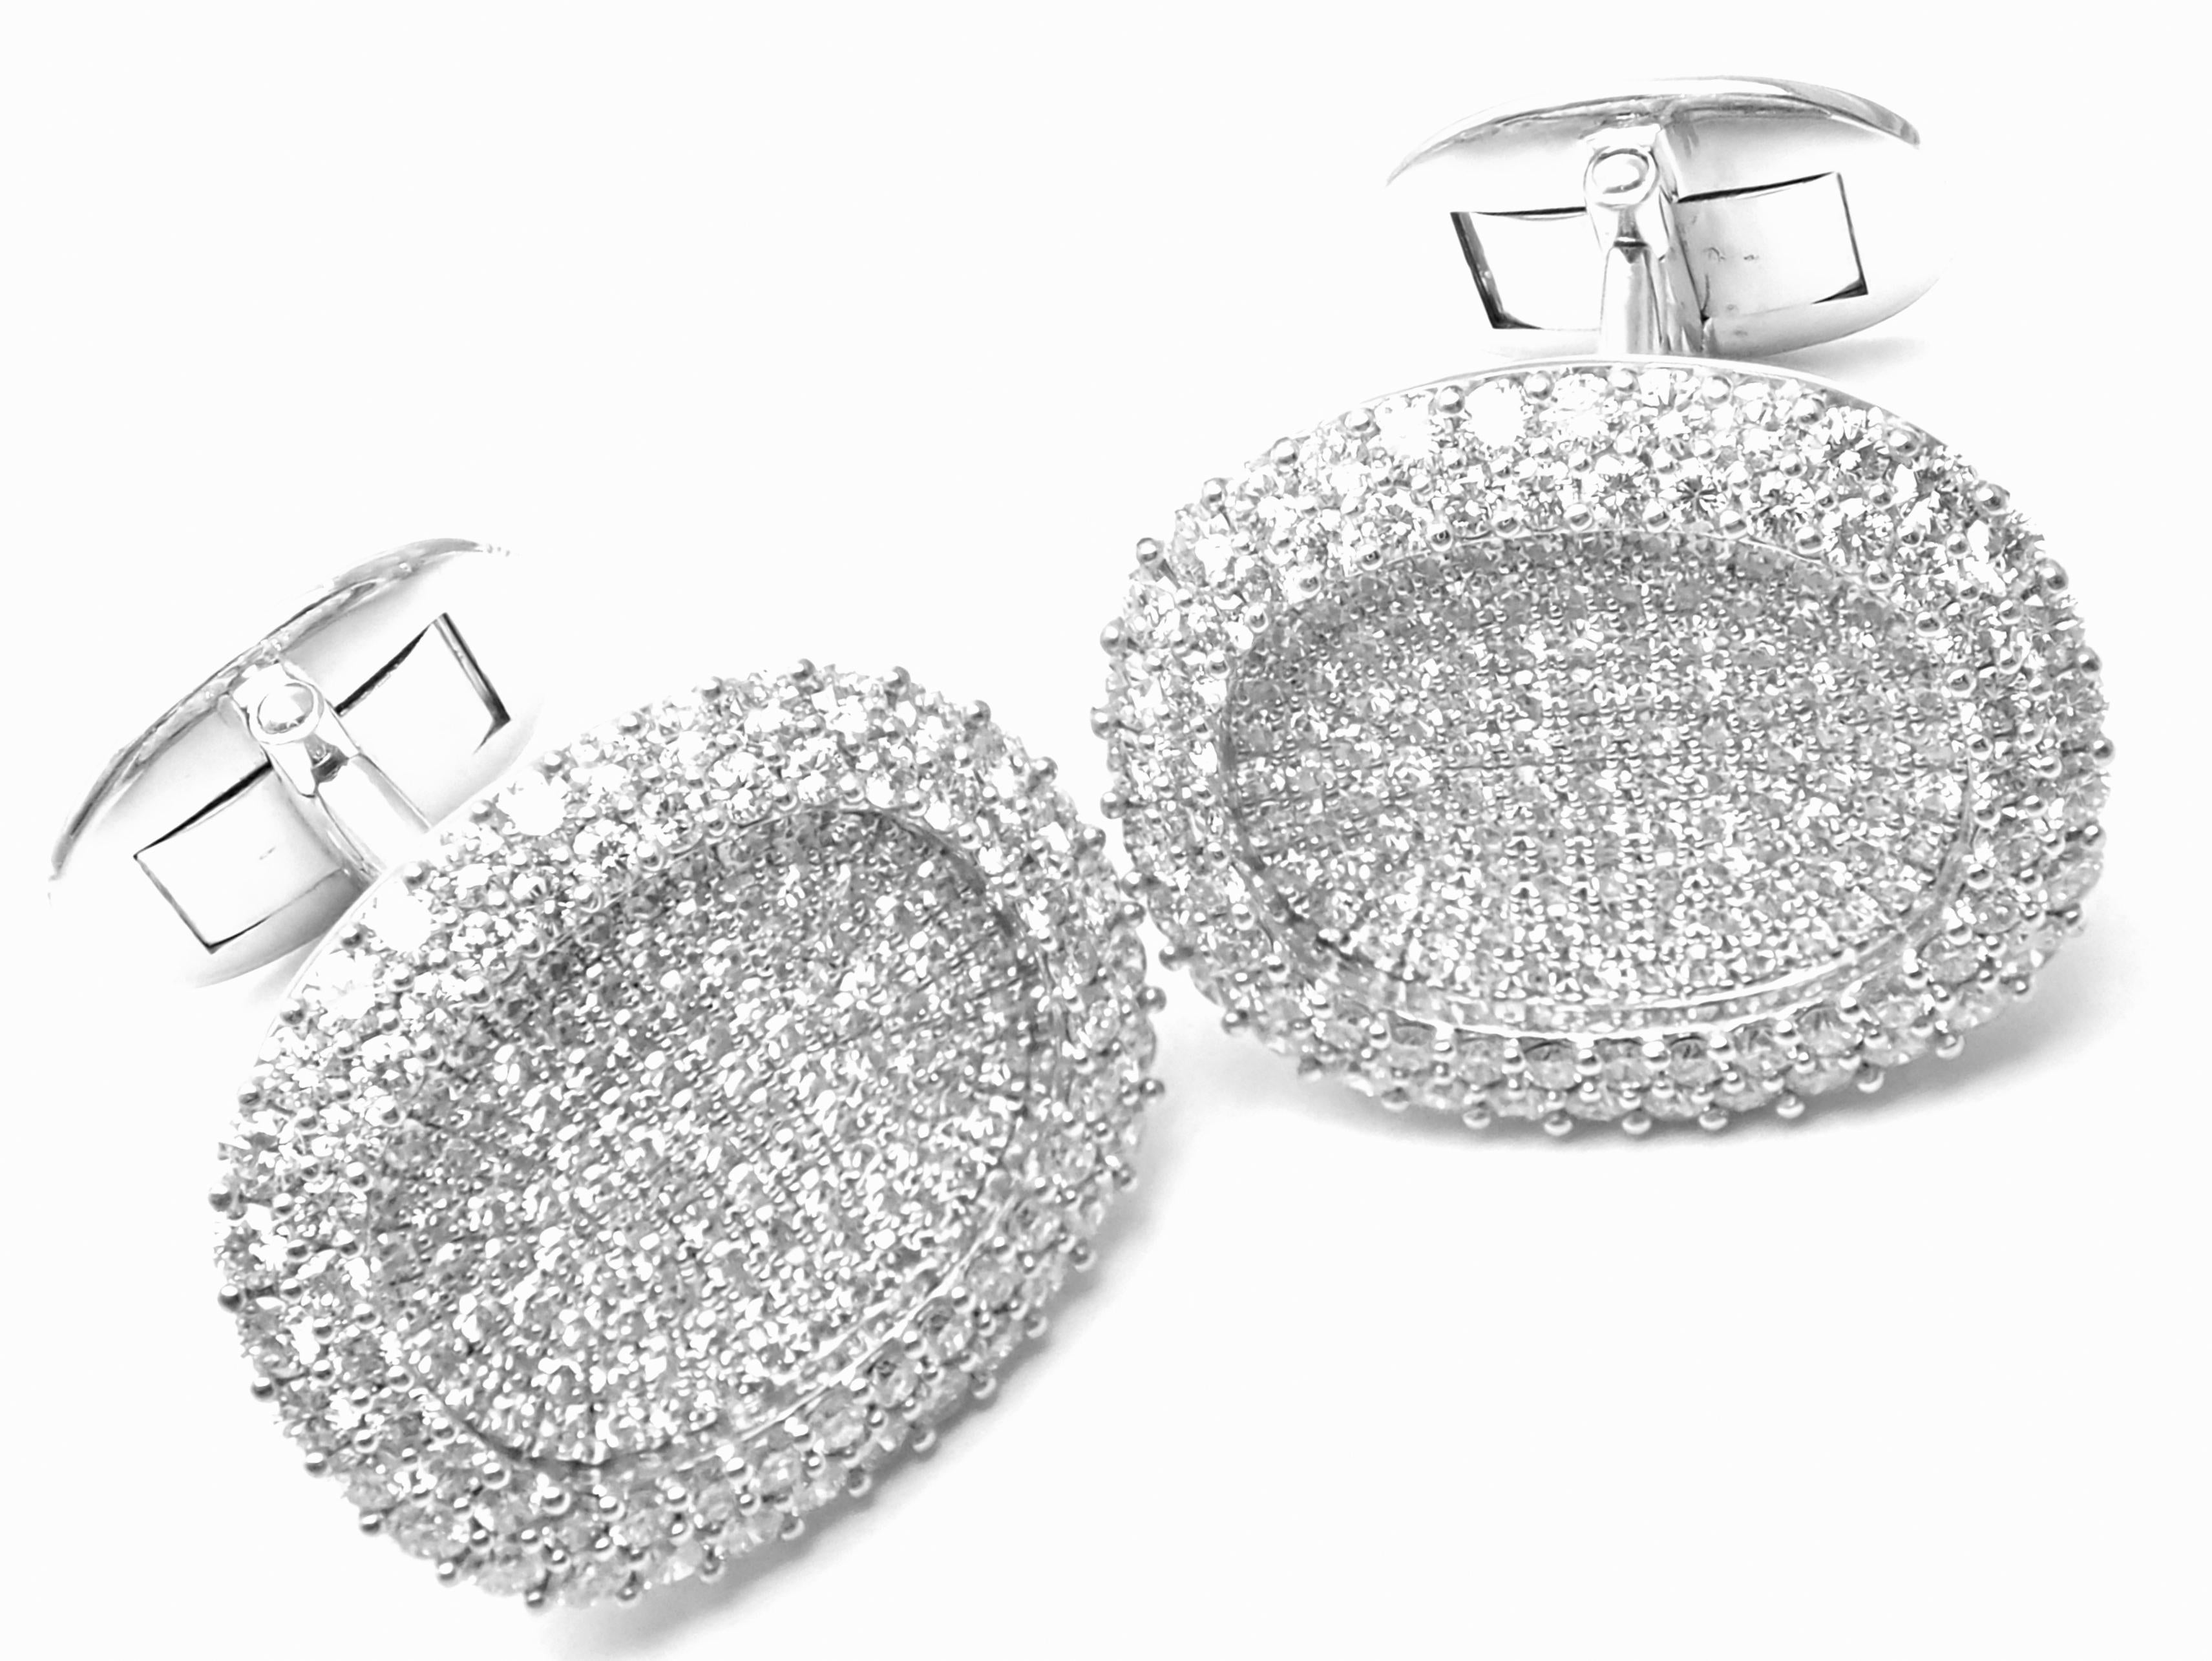 18k White Gold Diamond Ellipse Cufflinks by Patek Philippe.
With Round brilliant cut diamonds VVS1 clarity, E color total weight approx. 5ct
Details:
Measurements: 23mm x 19mm
Weight: 21.5 grams
Stamped Hallmarks: PPCo 750
*Free Shipping within the